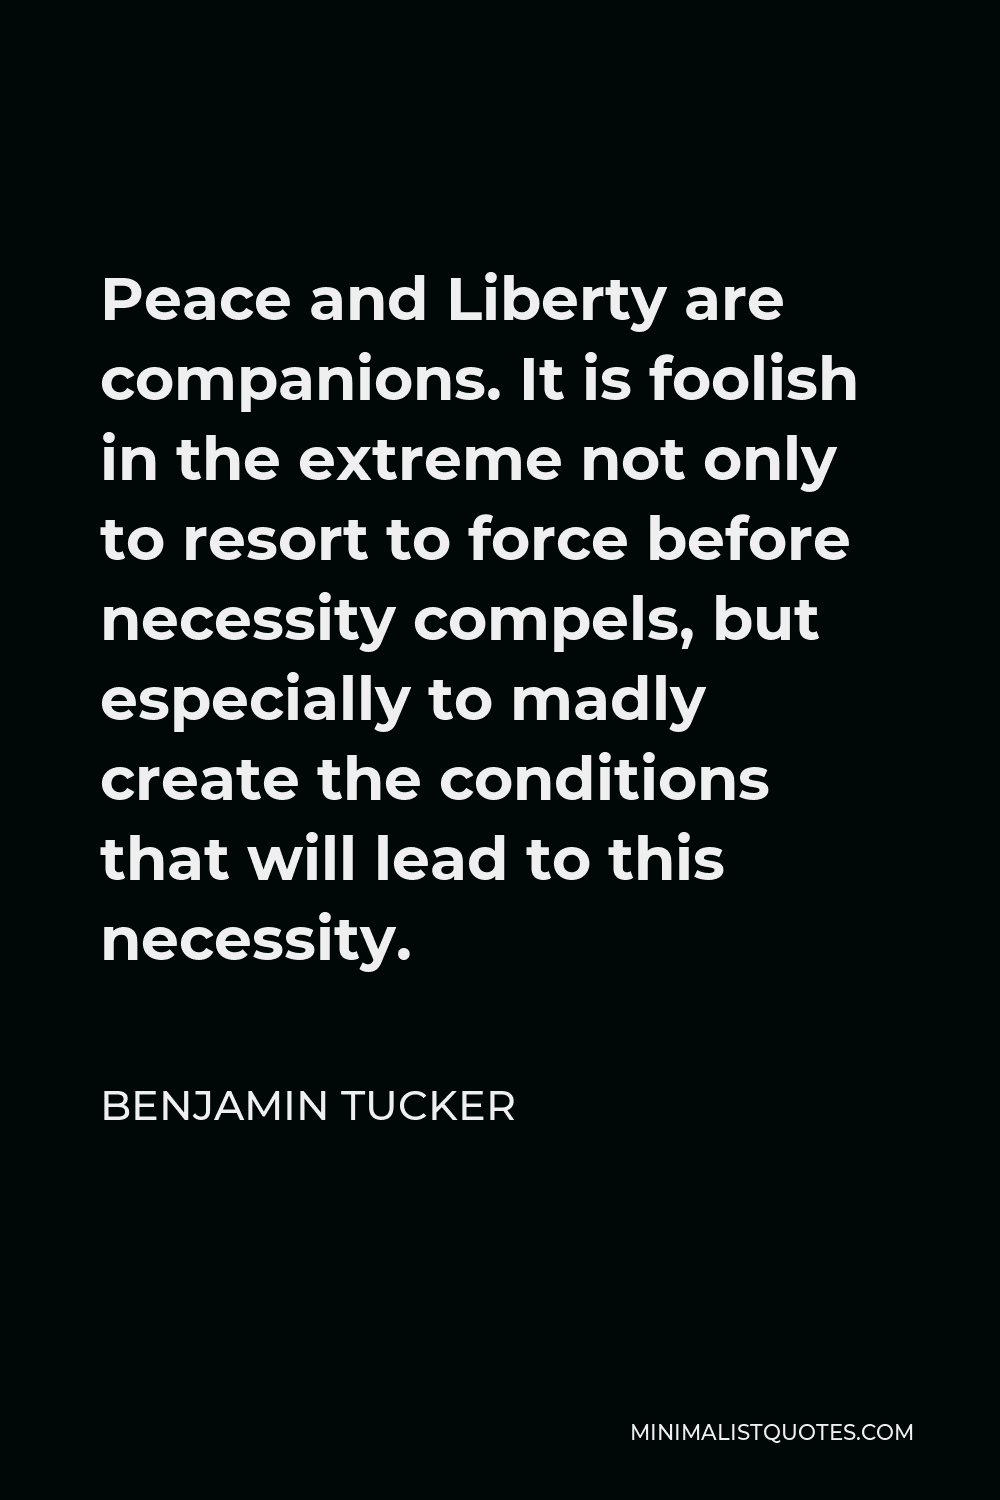 Benjamin Tucker Quote - Peace and Liberty are companions. It is foolish in the extreme not only to resort to force before necessity compels, but especially to madly create the conditions that will lead to this necessity.